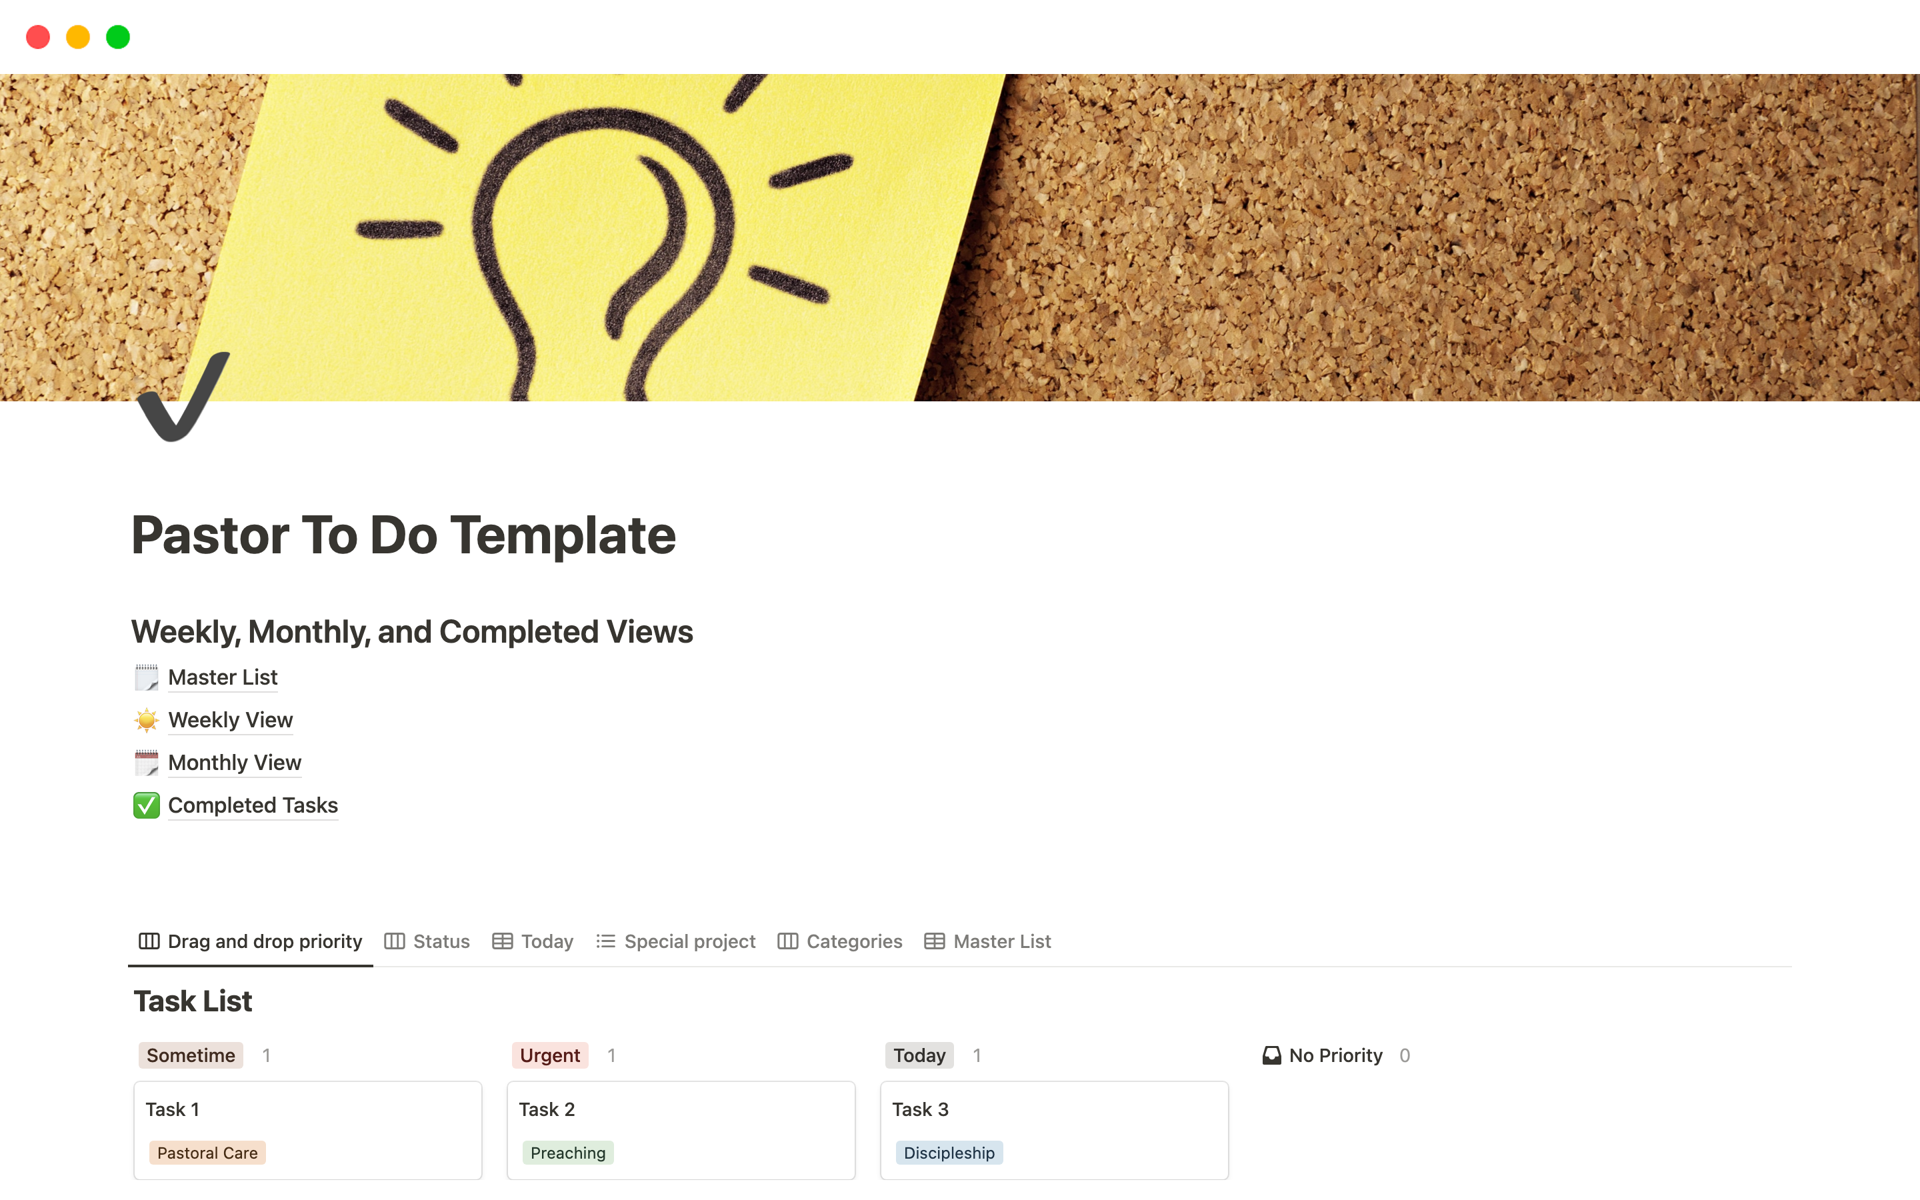 This template helps pastors and leaders to organize their ministry tasks and projects. You can assign tasks to different people on your team, set due dates, prioritize tasks, and catagorize tasks according to areas of responsibility.